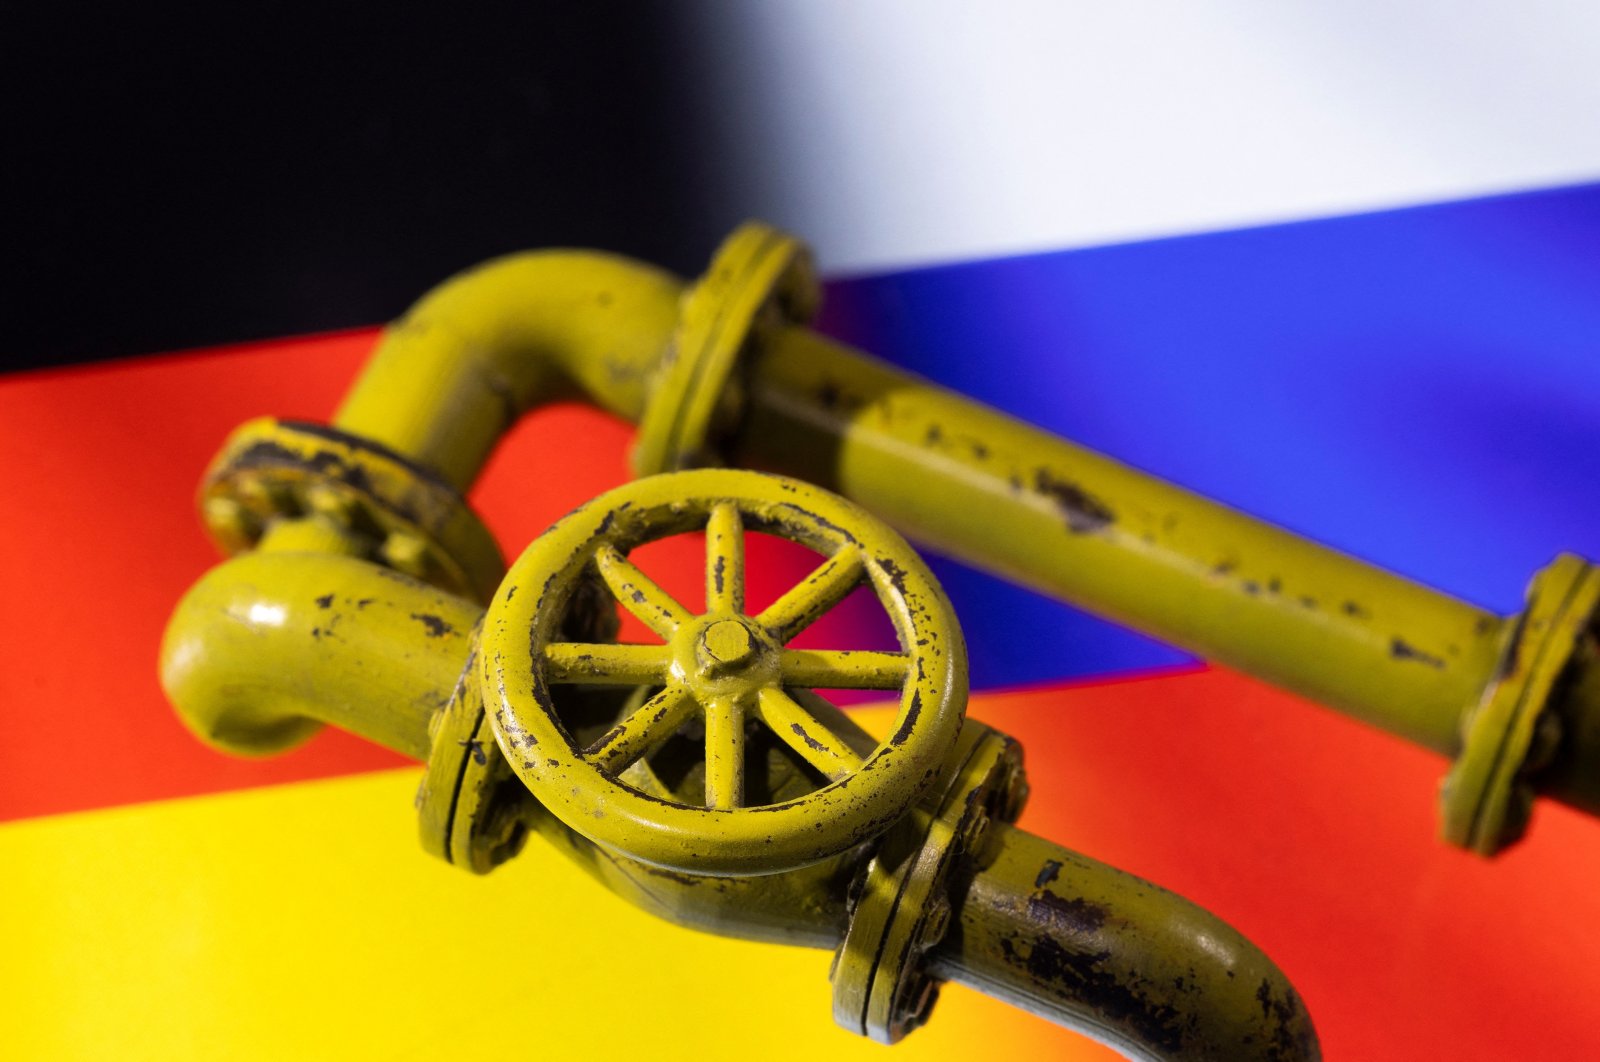 3D printed natural gas pipes are displayed on German and Russian flags, Jan. 31, 2022. (Reuters Photo)